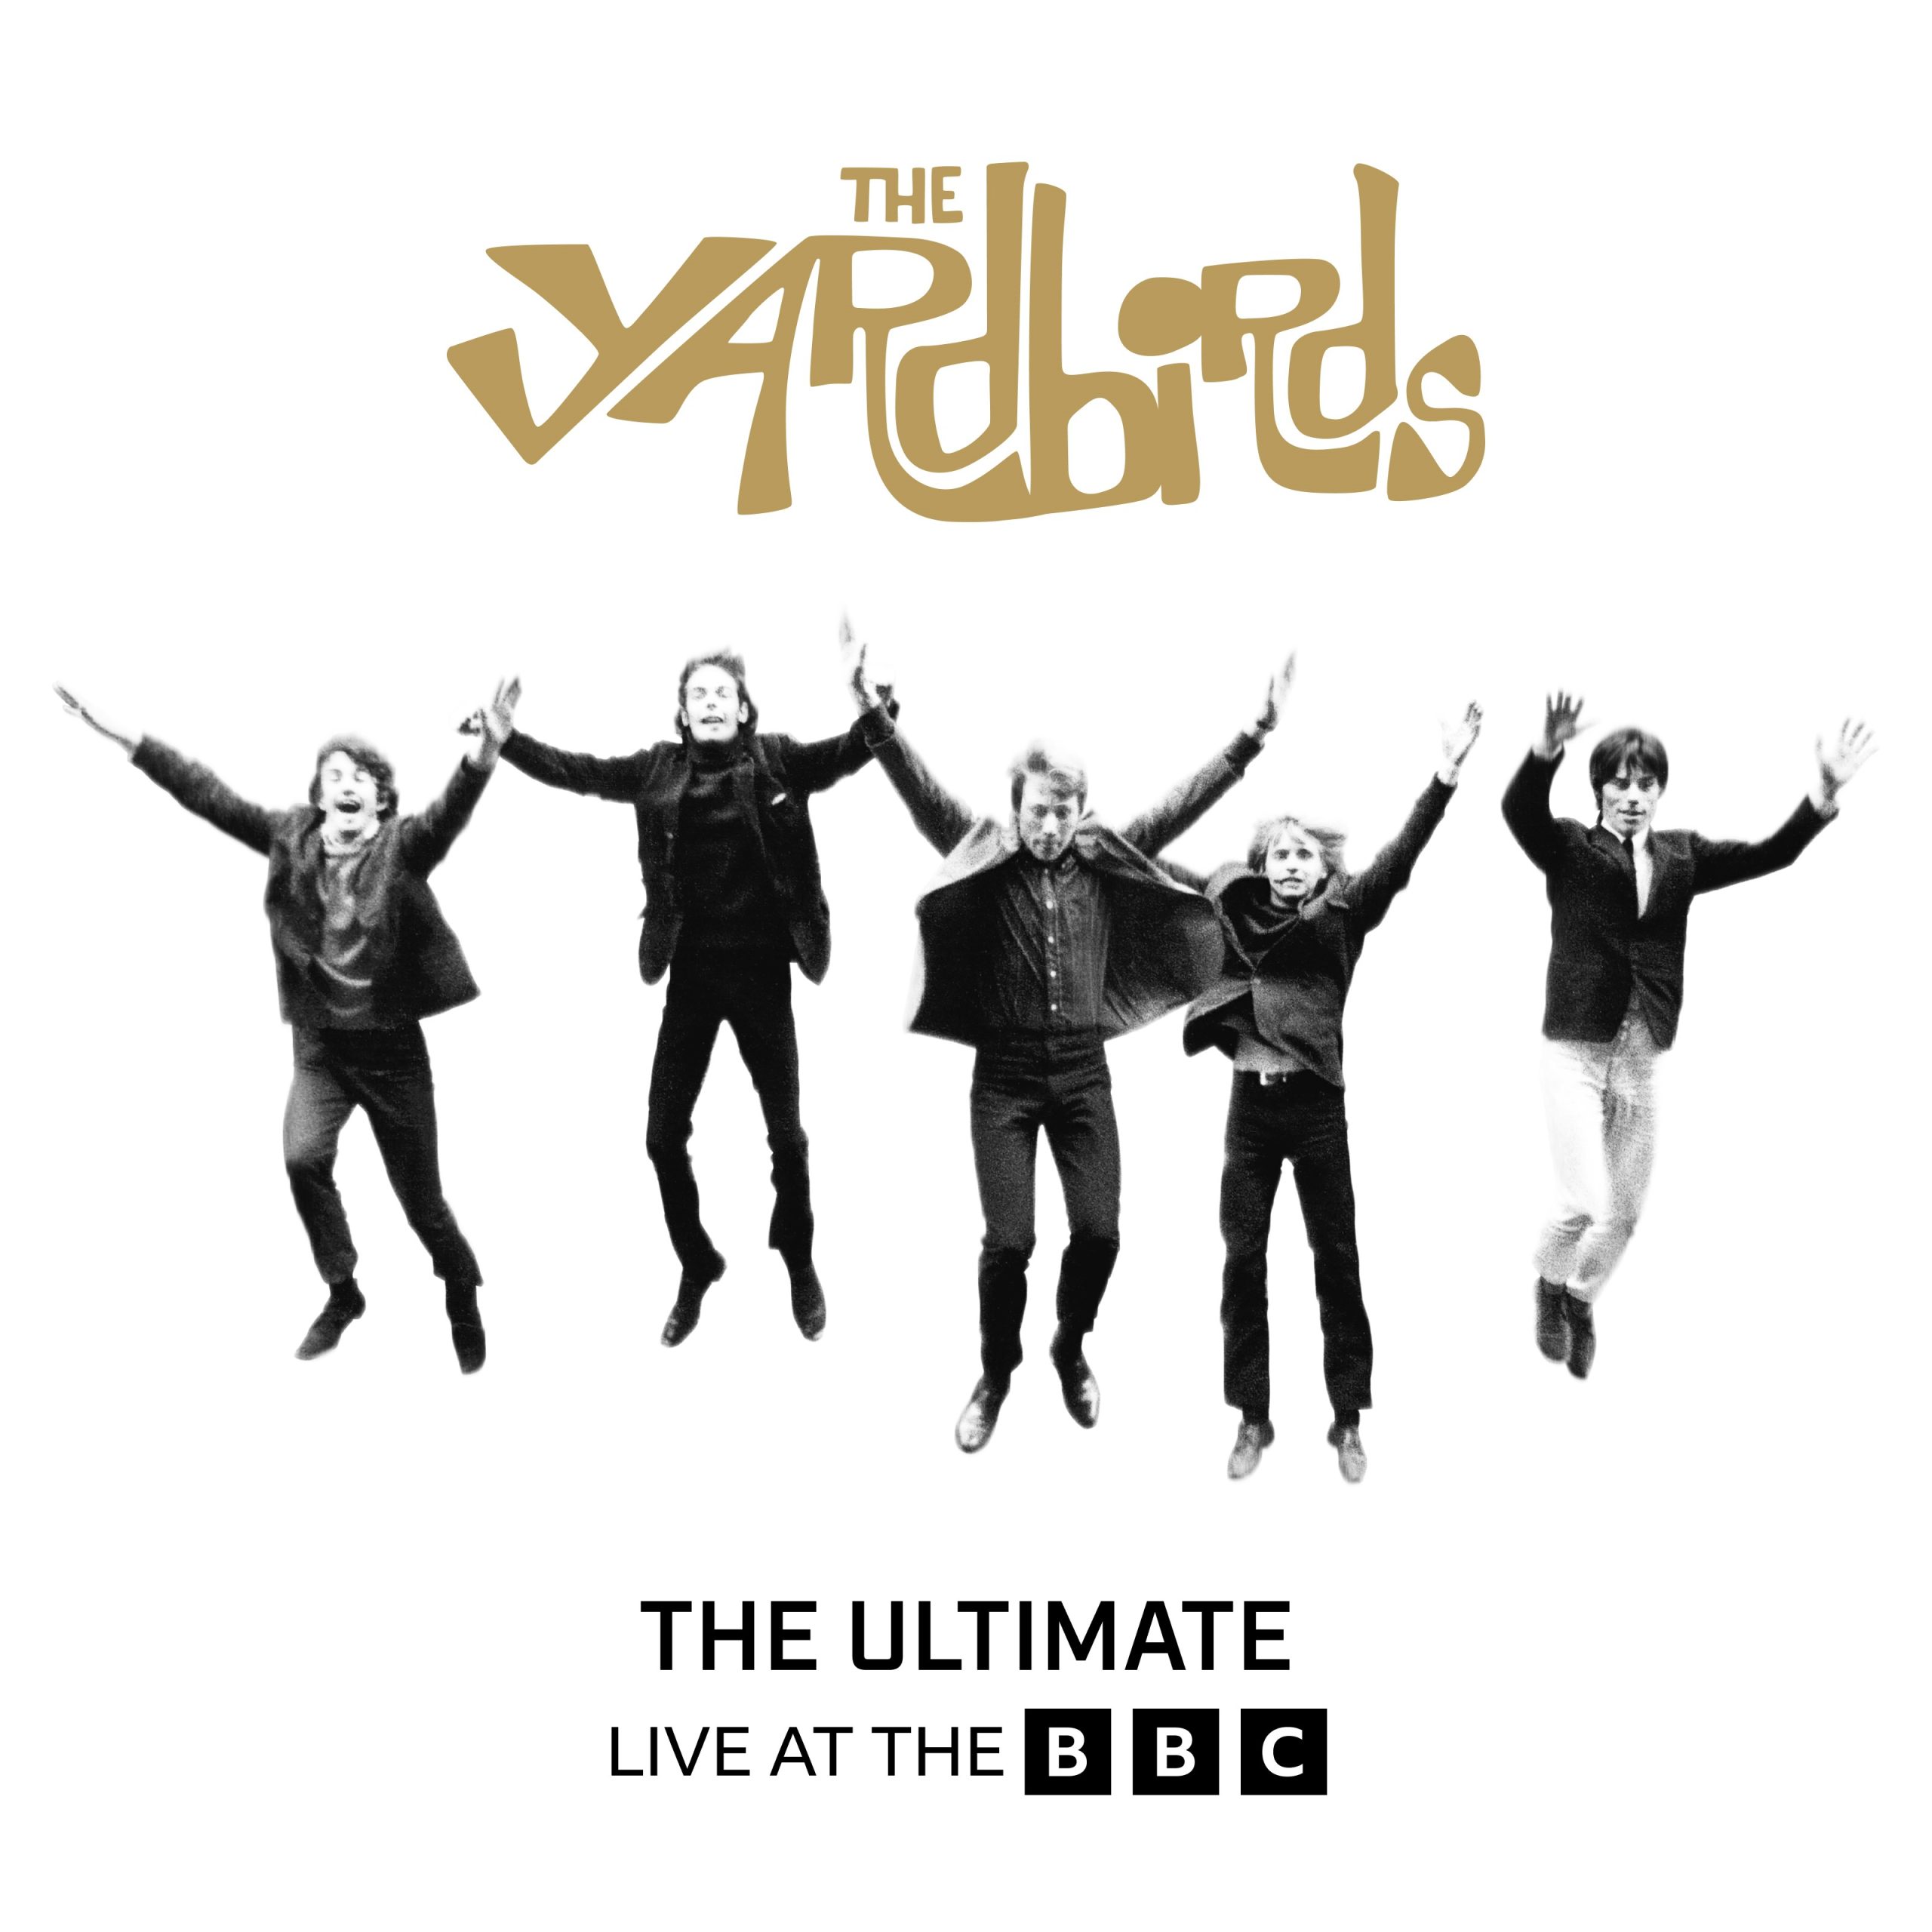 The Yardbirds – The Ultimate Live At The BBC